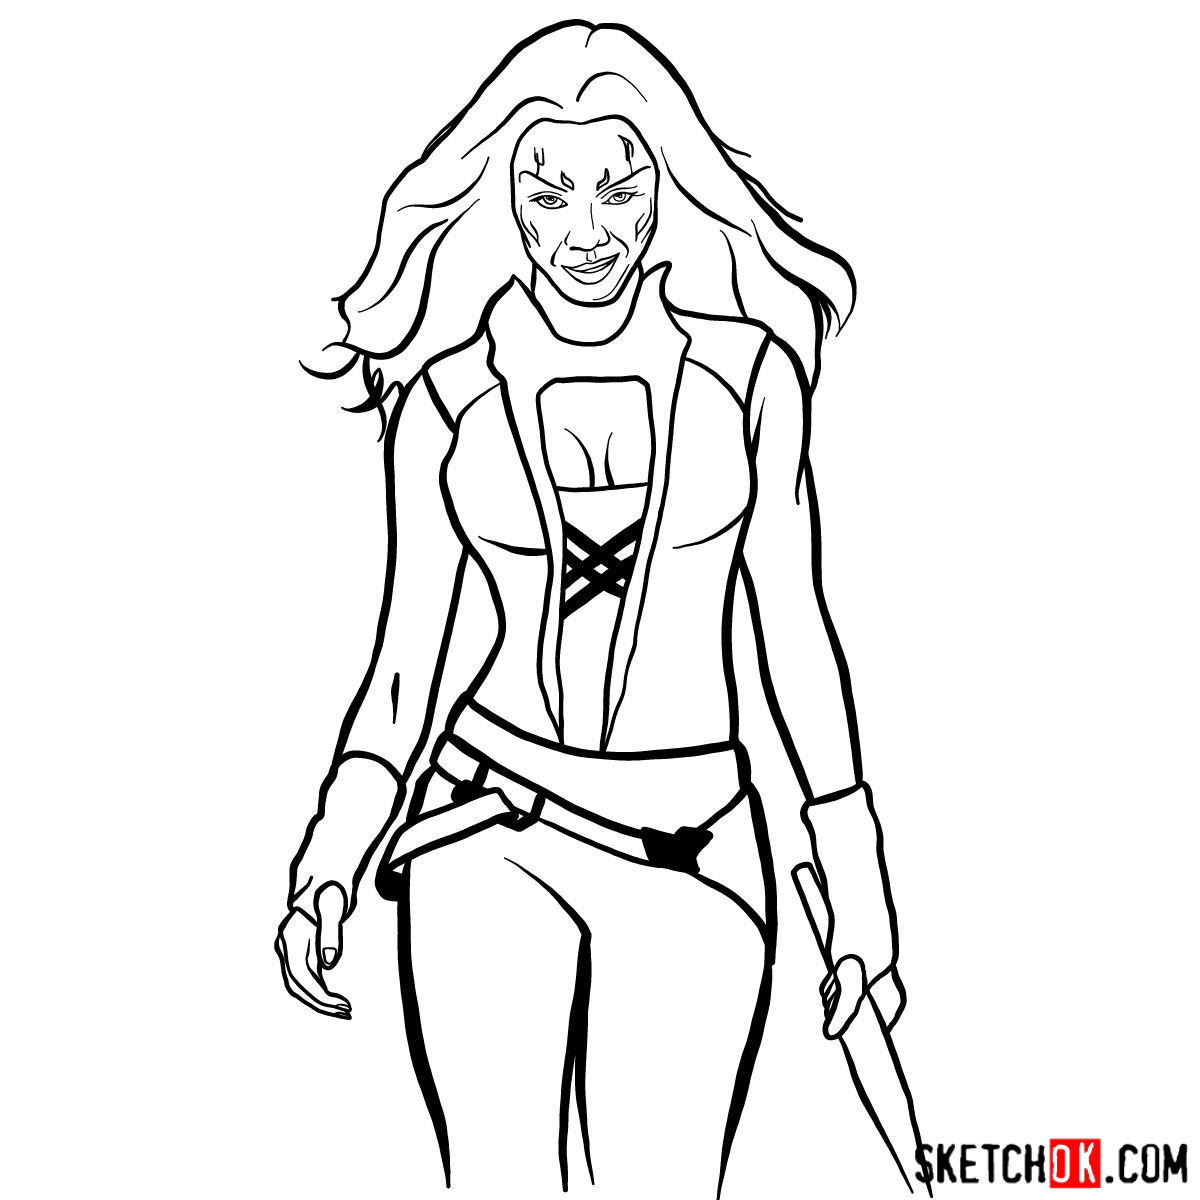 How to draw Gamora from Guardians of the Galaxy - step 13